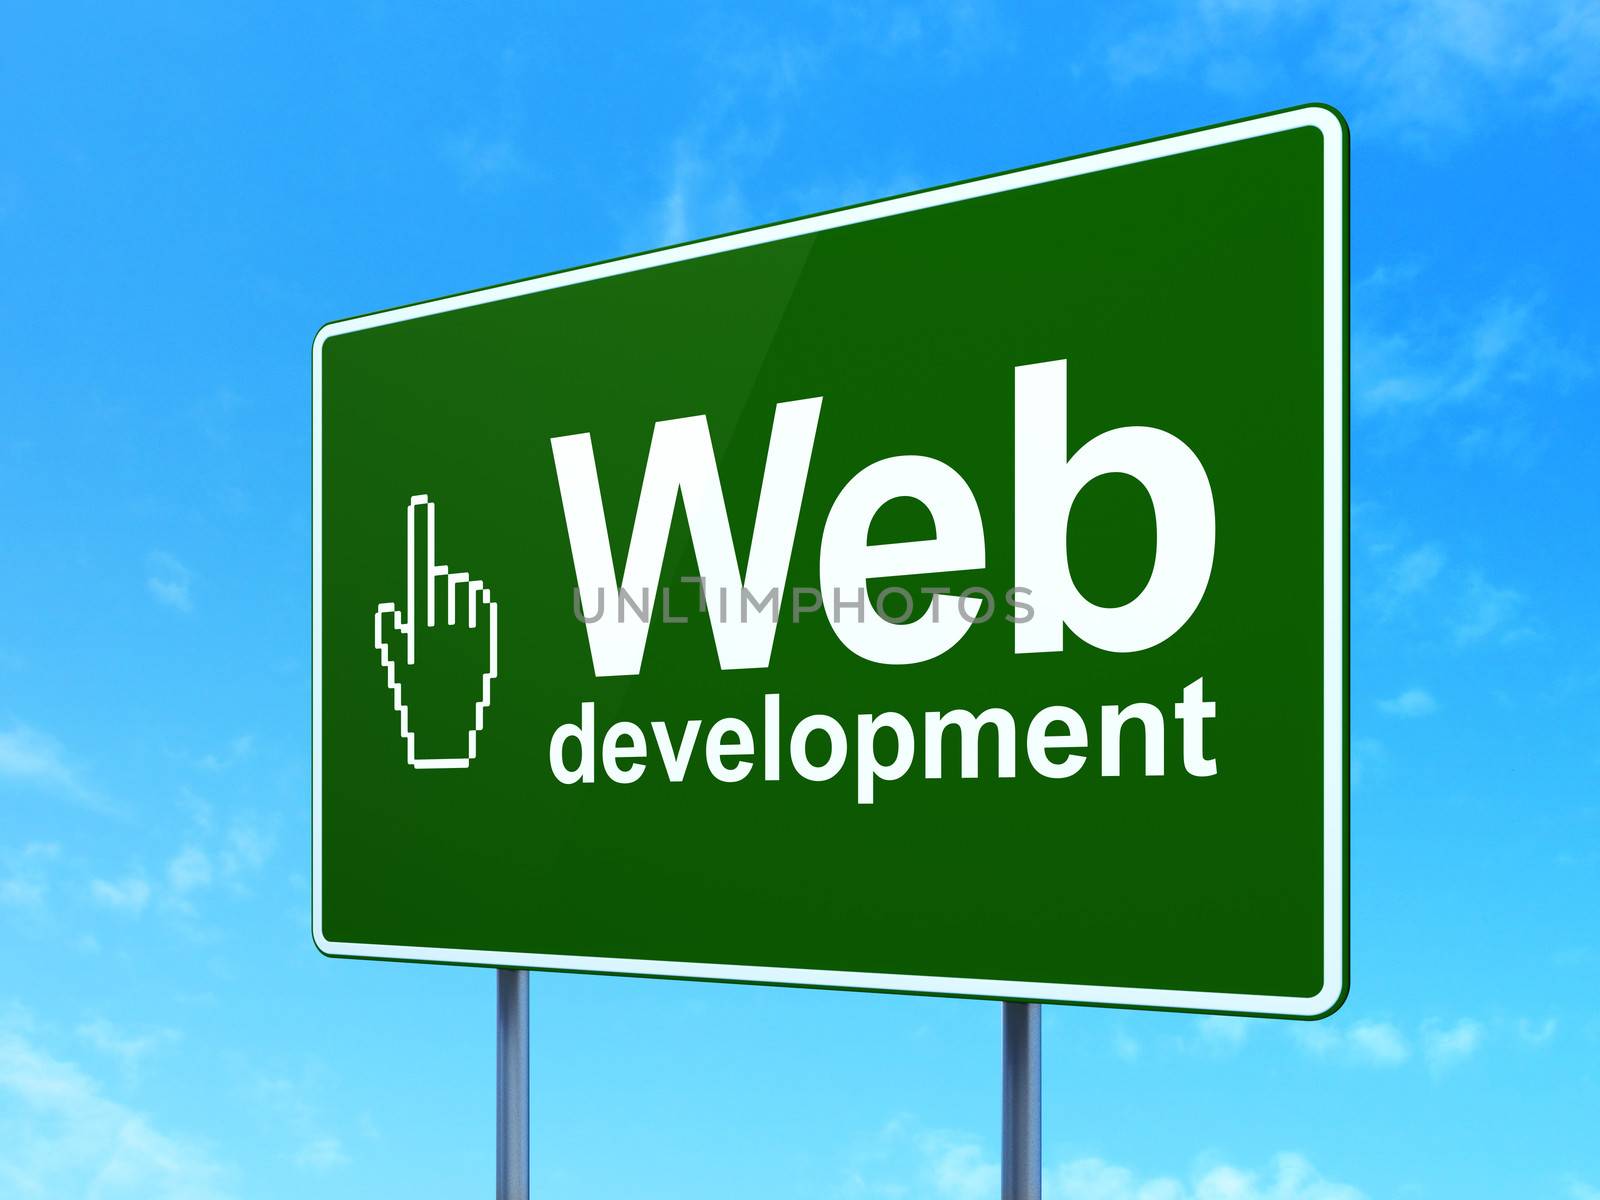 Web development concept: Web Development and Mouse Cursor icon on green road (highway) sign, clear blue sky background, 3d render